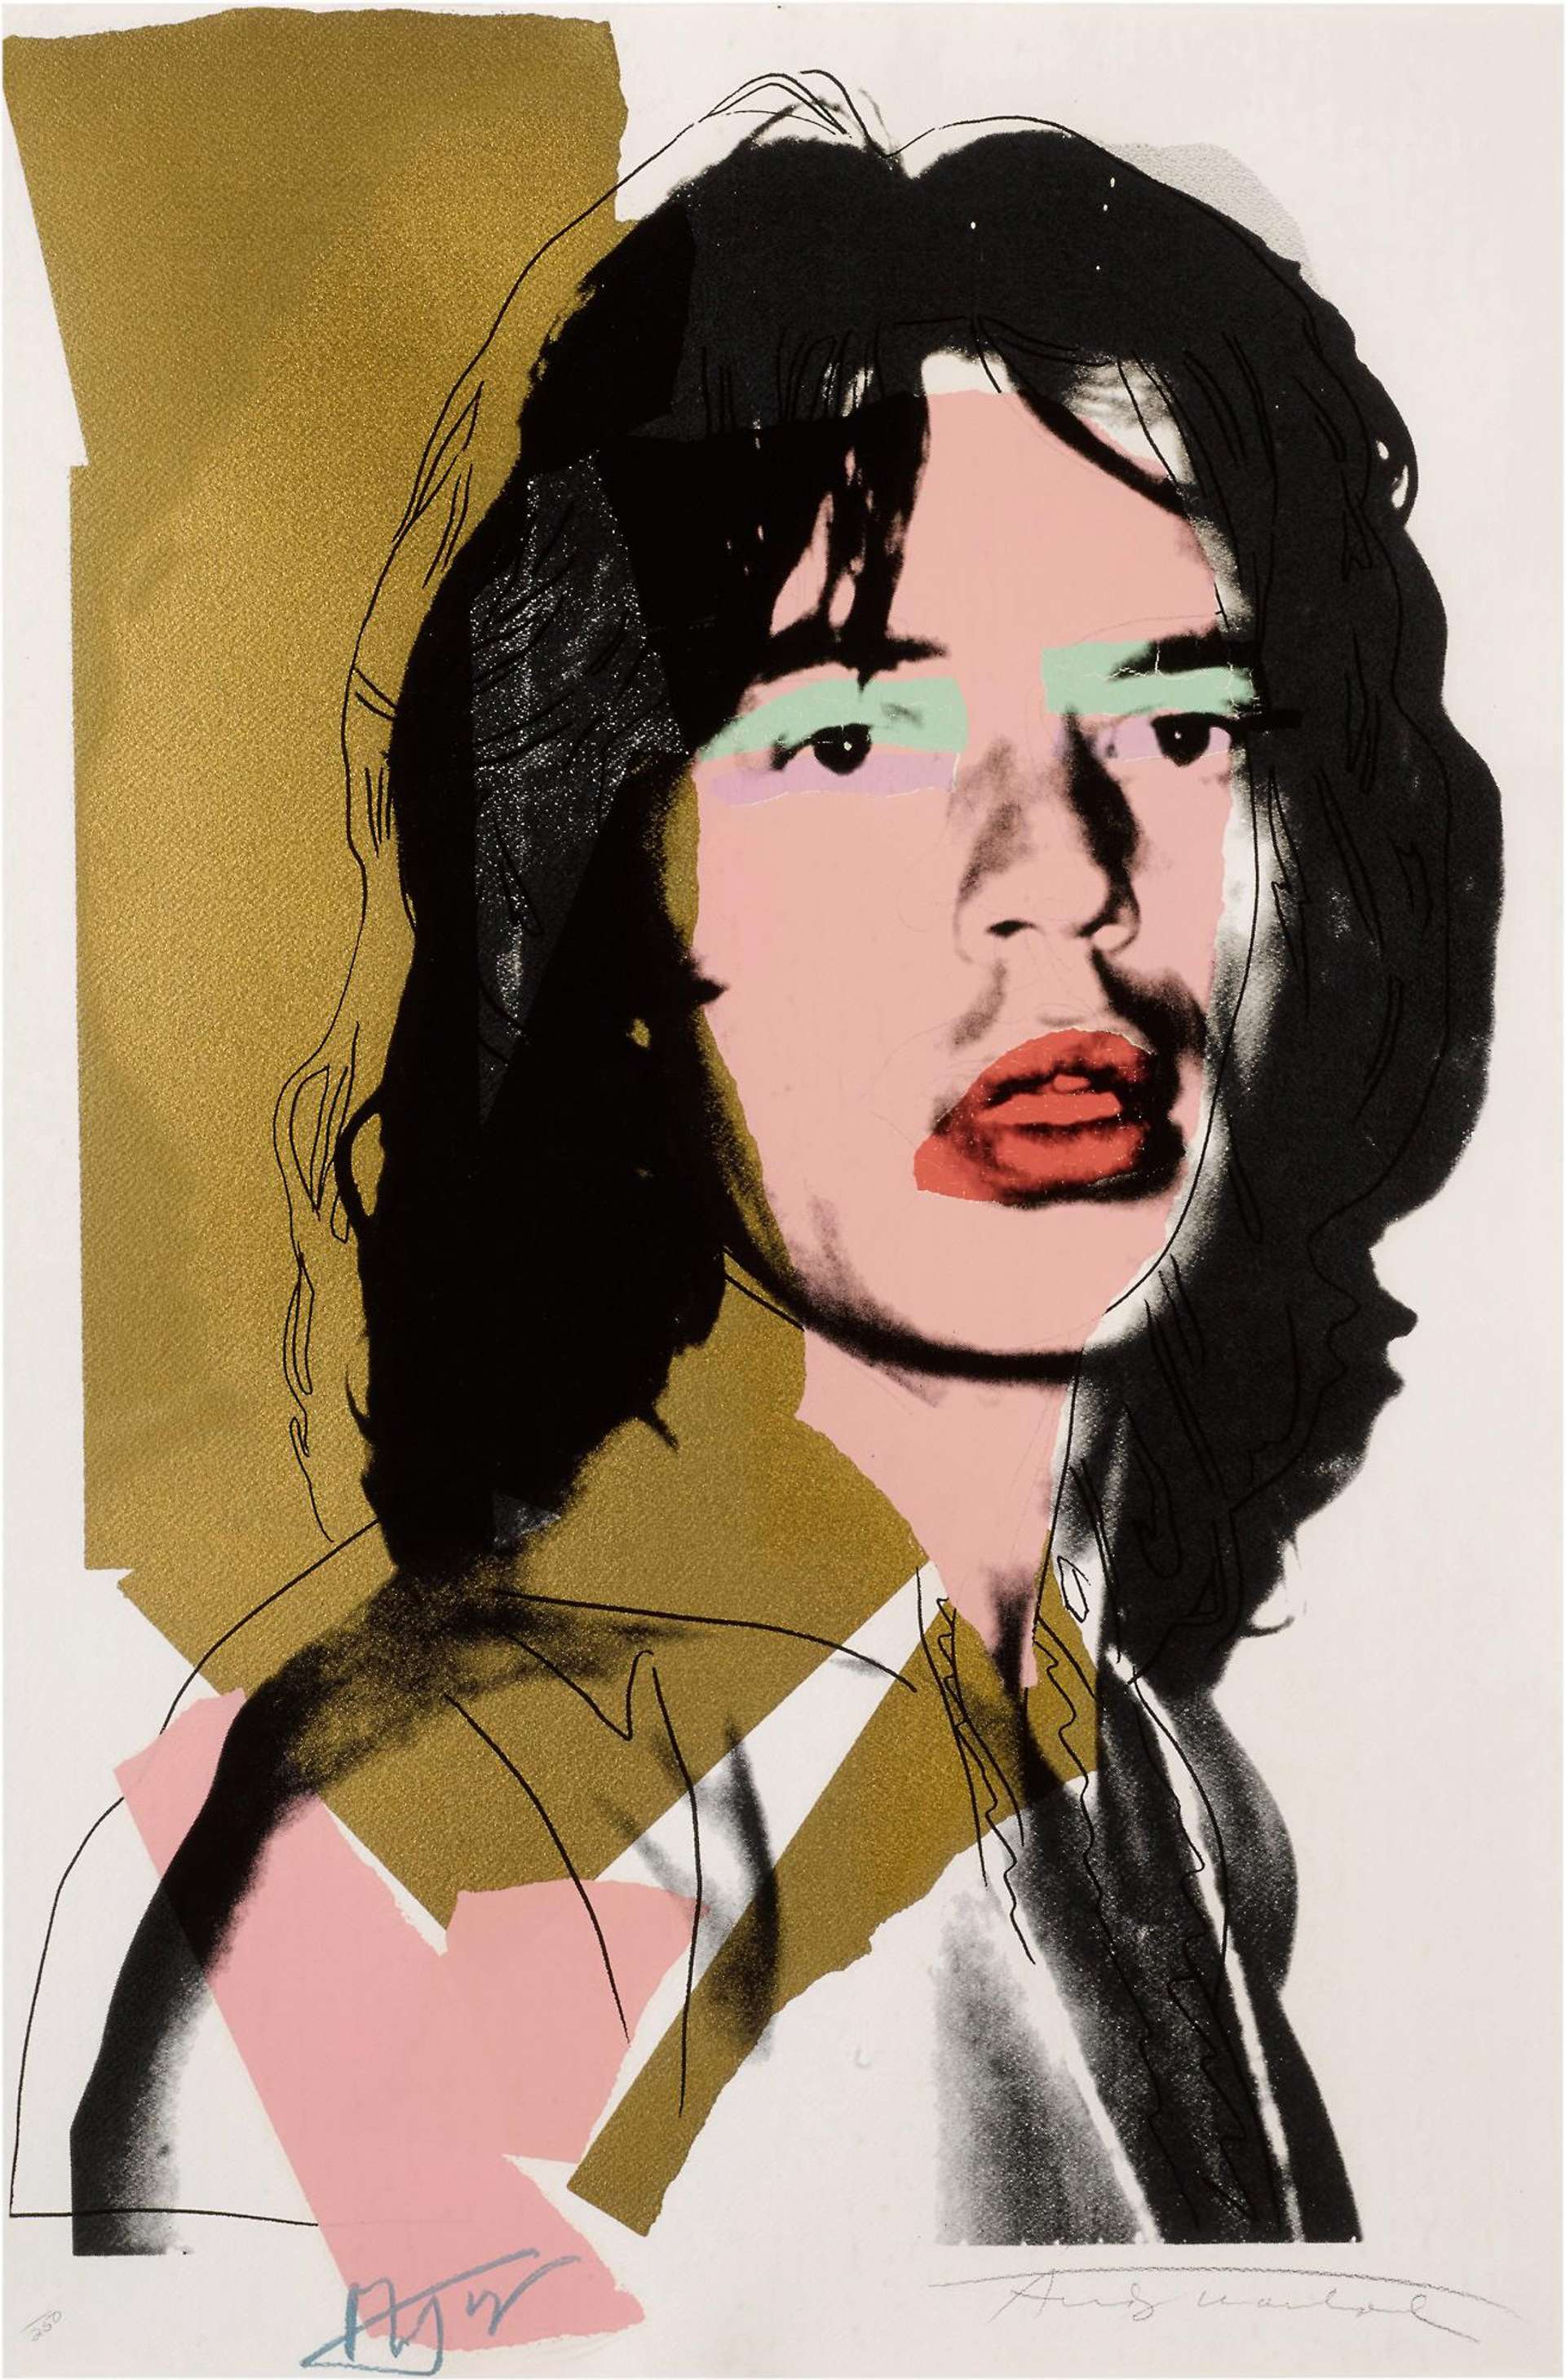 An Andy Warhol screenprint depicting Rolling Stones frontman Mick Jagger. His face is screenprinted across an abstracted golden block of colour with turquoise swathes on his eyelids and crimson red smeared across his lips.